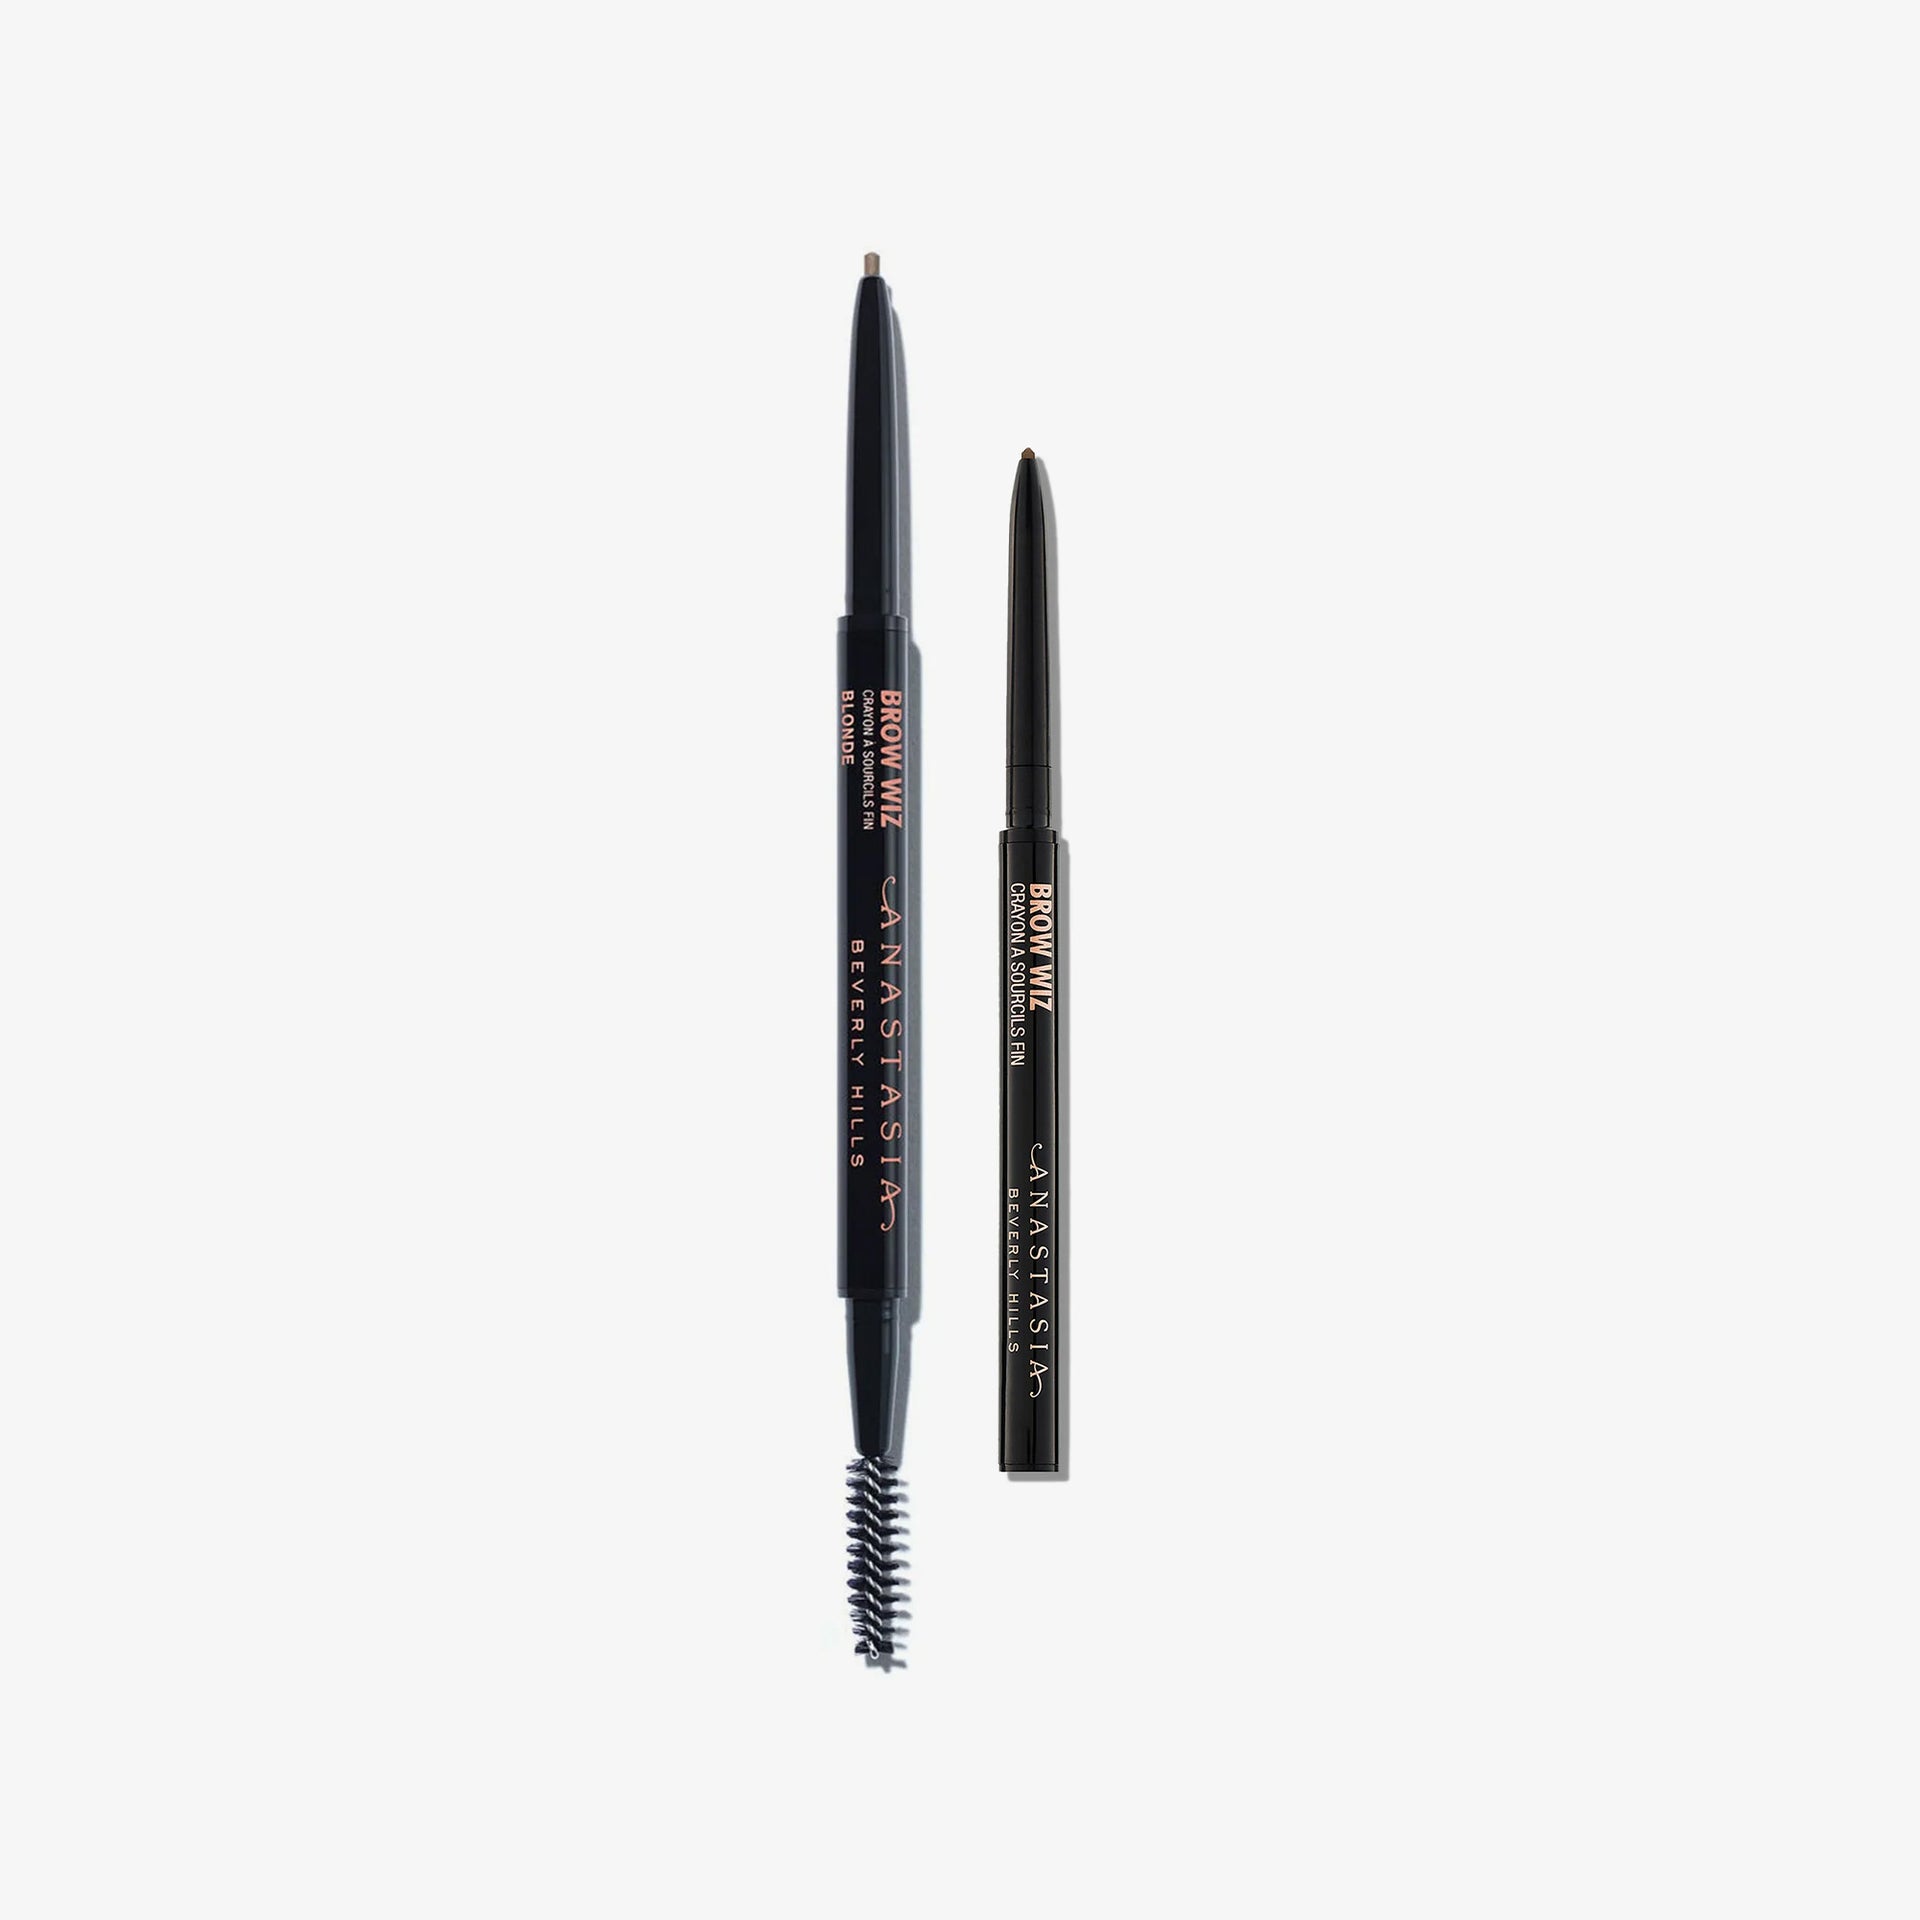 Discover Balanced Brows Duo